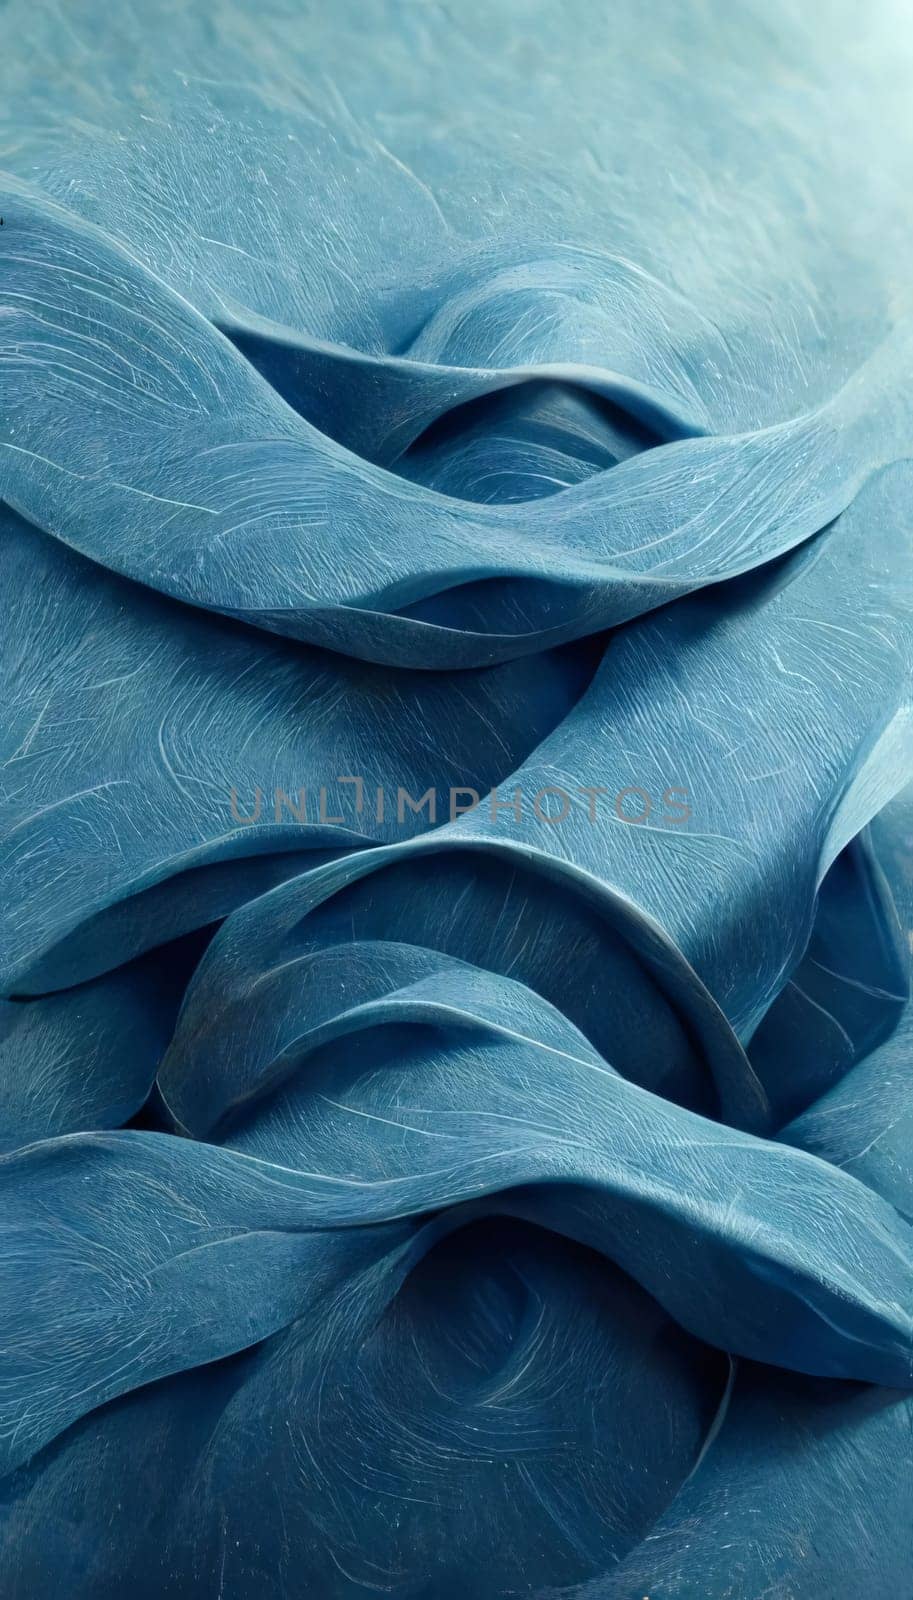 Abstract background design: abstract background of blue silk fabric with folds close-up.